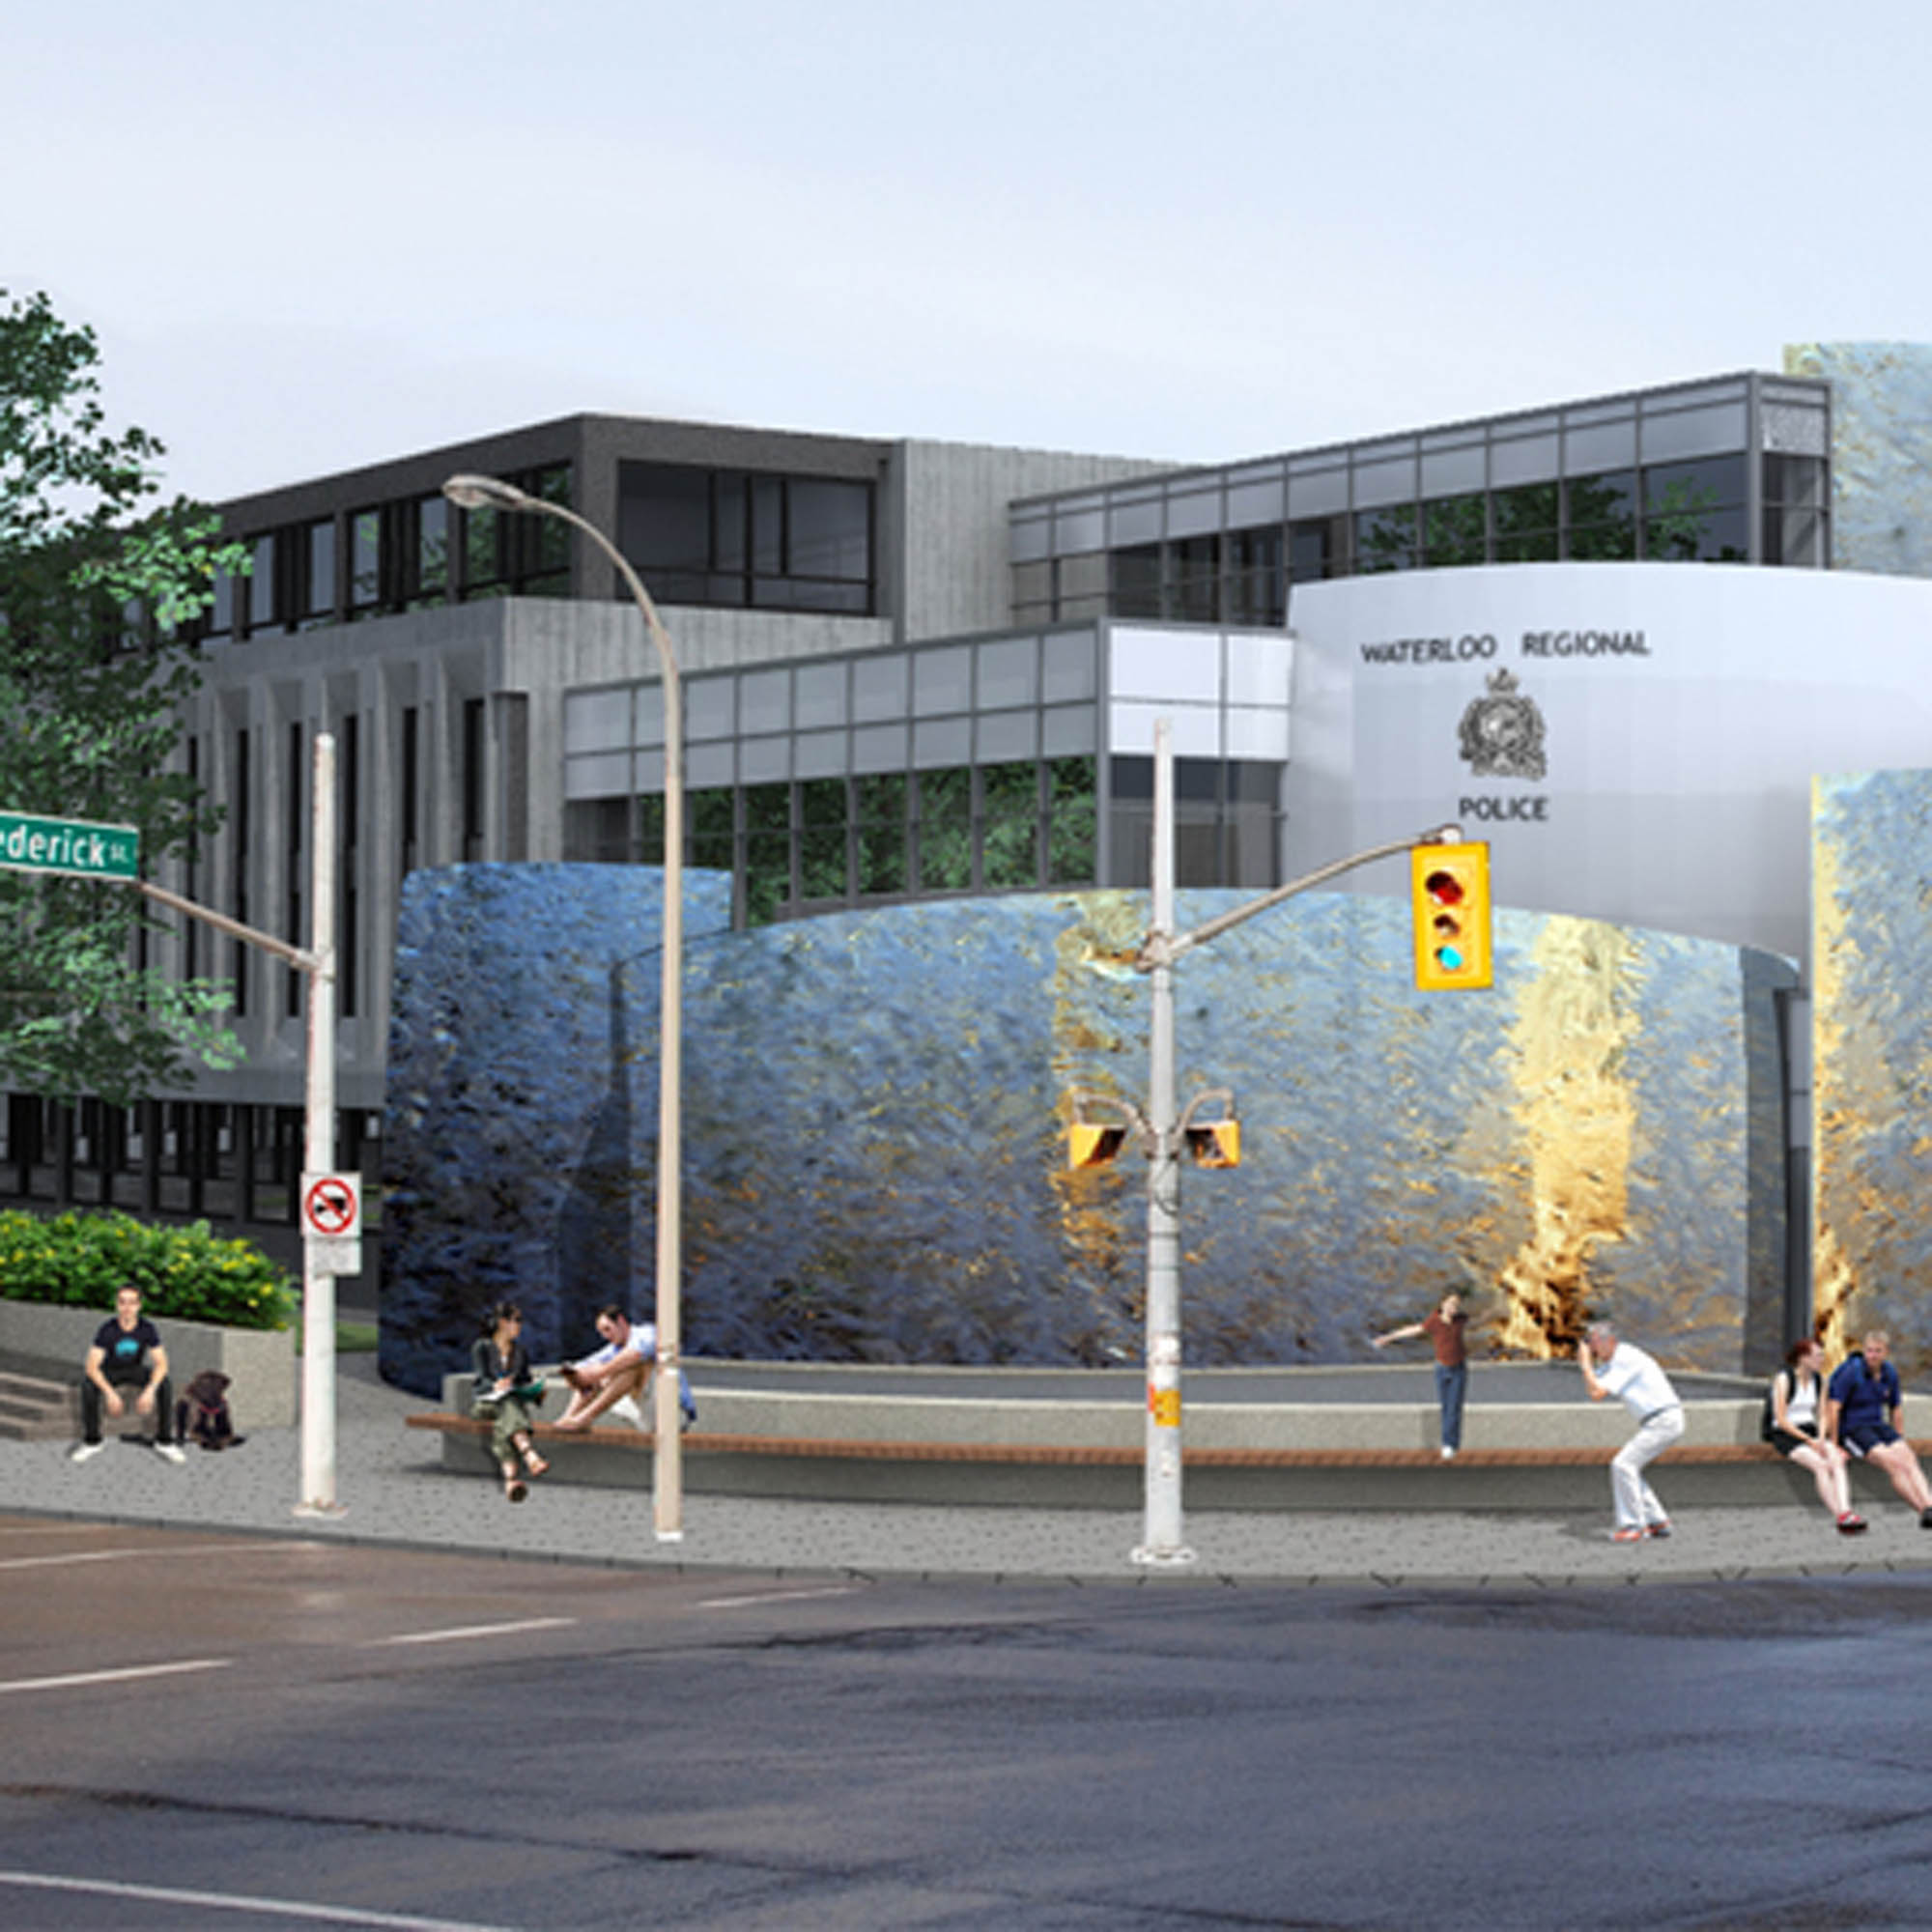 Proposed police station design for the Waterloo Regional Police Service